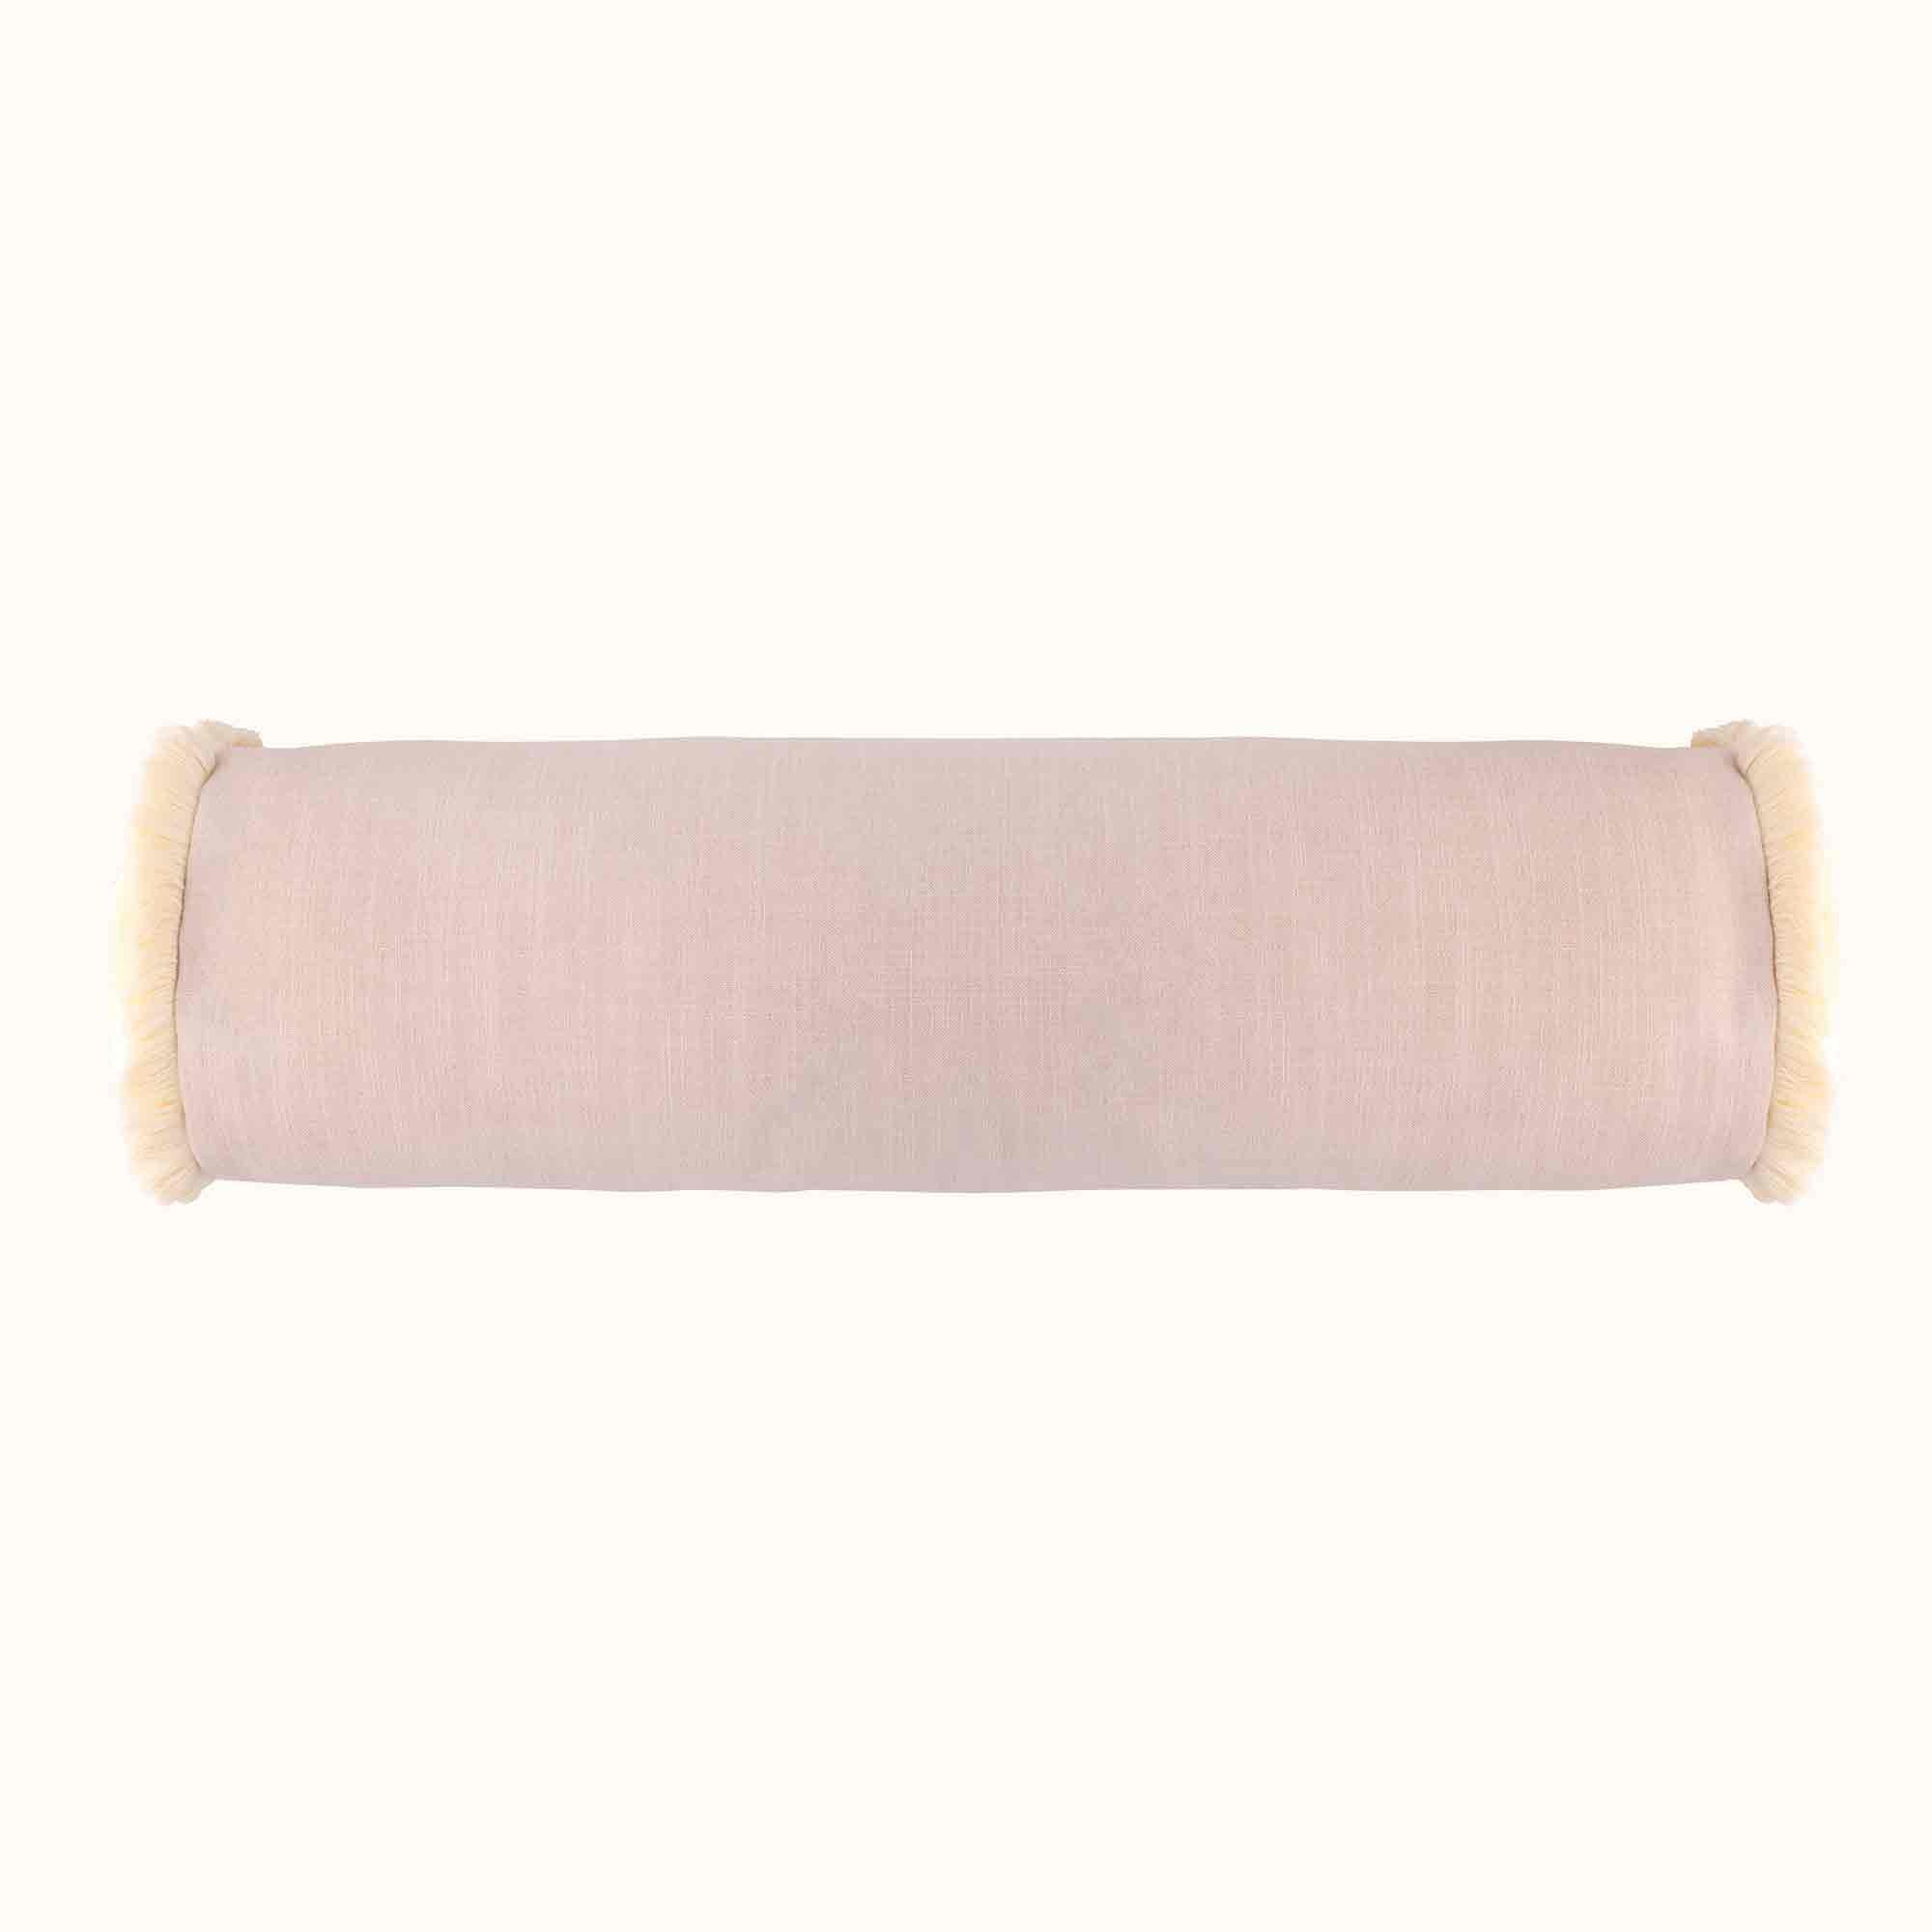 Small Bolster Cushion with Fringe